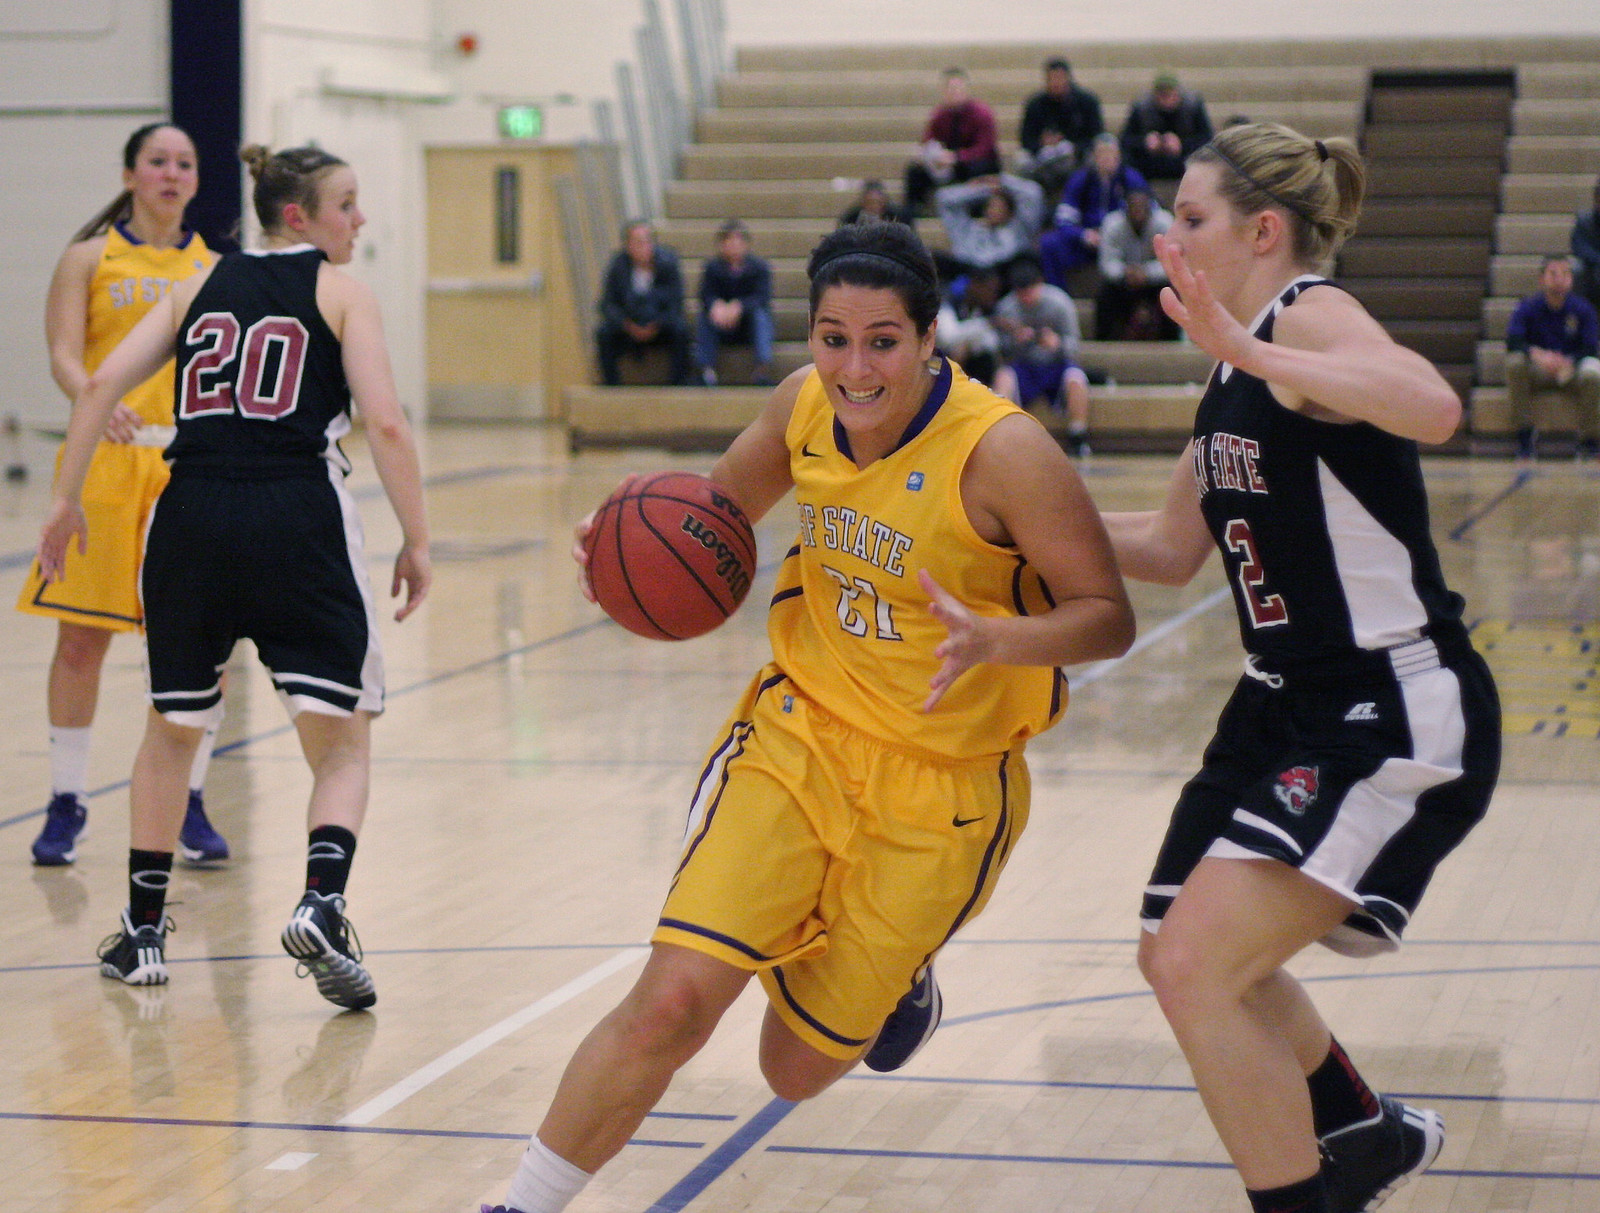 Katie Batlin (#21) dodges the other team at the SF State vs. Chico State Women's Basketball game at the Swamp on Friday, Dec. 6, 2013. Photo by Ryan Leibrich / Xpress